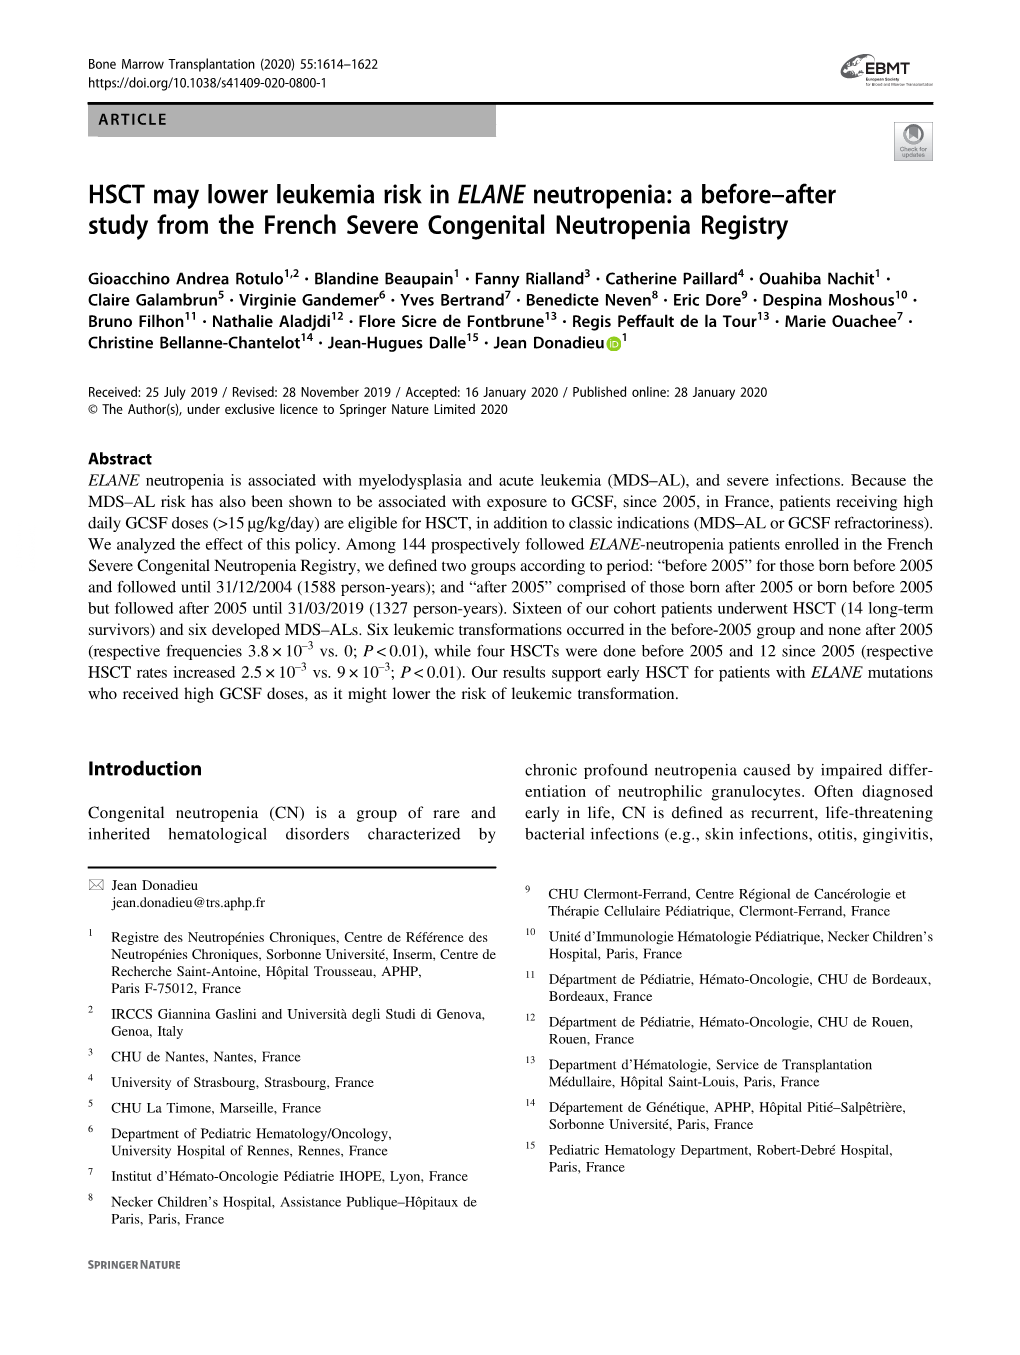 HSCT May Lower Leukemia Risk in ELANE Neutropenia: a Before–After Study from the French Severe Congenital Neutropenia Registry